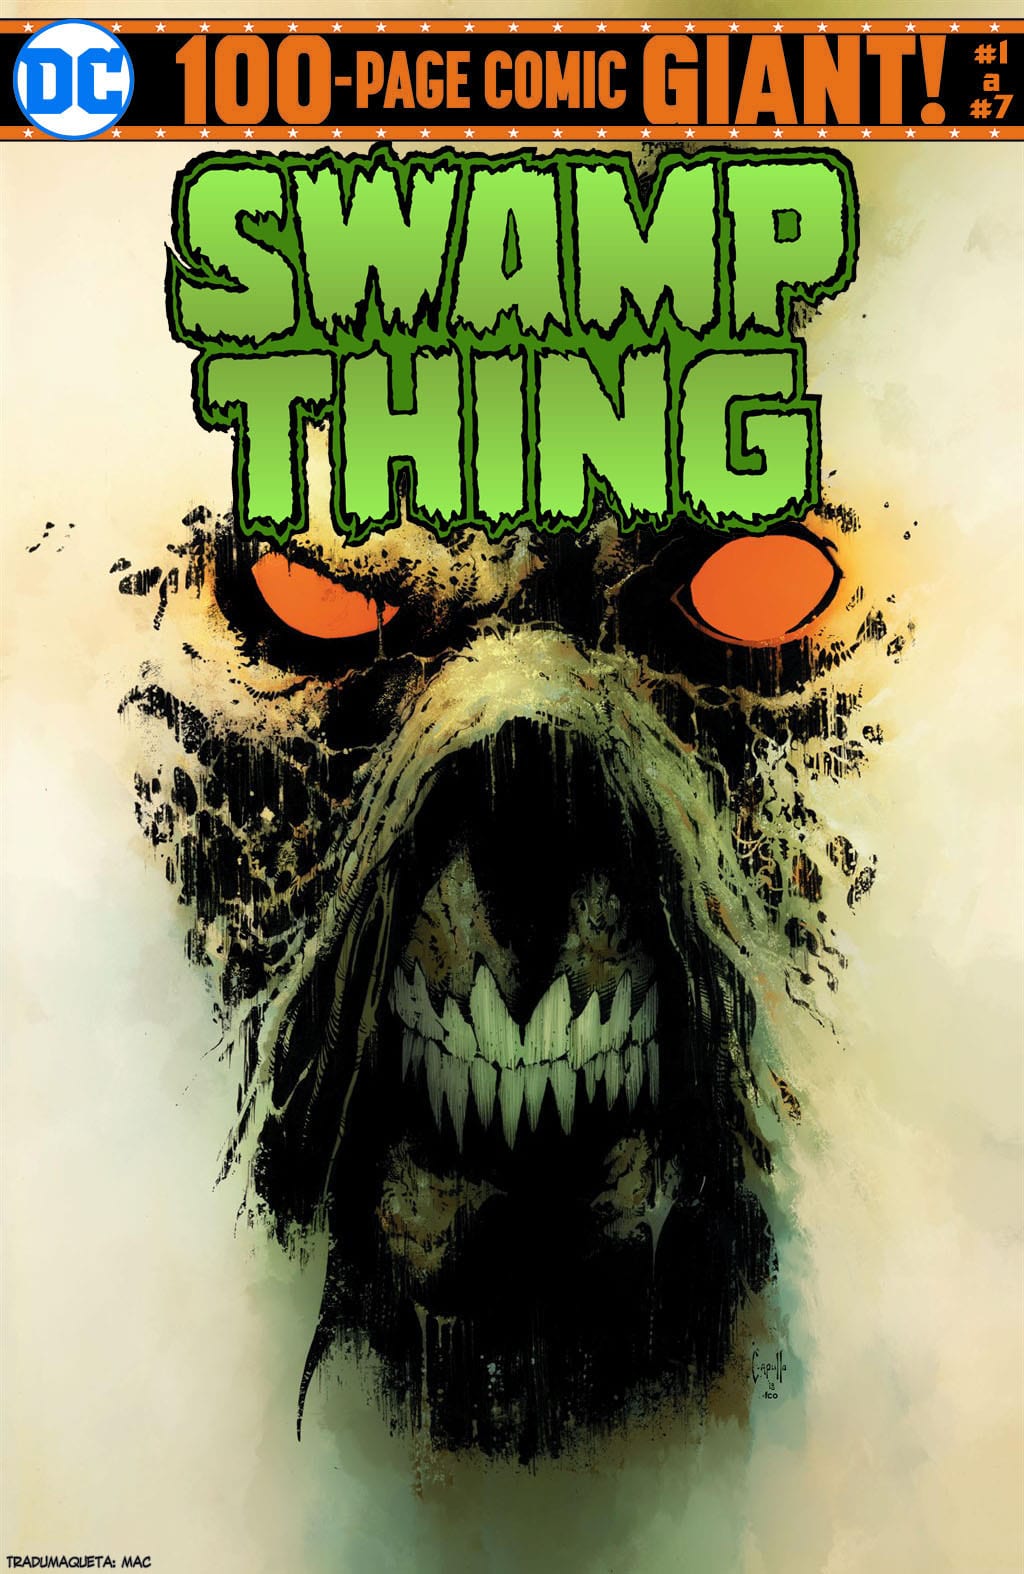 Comic completo Swamp Thing DC 100-Page Giant